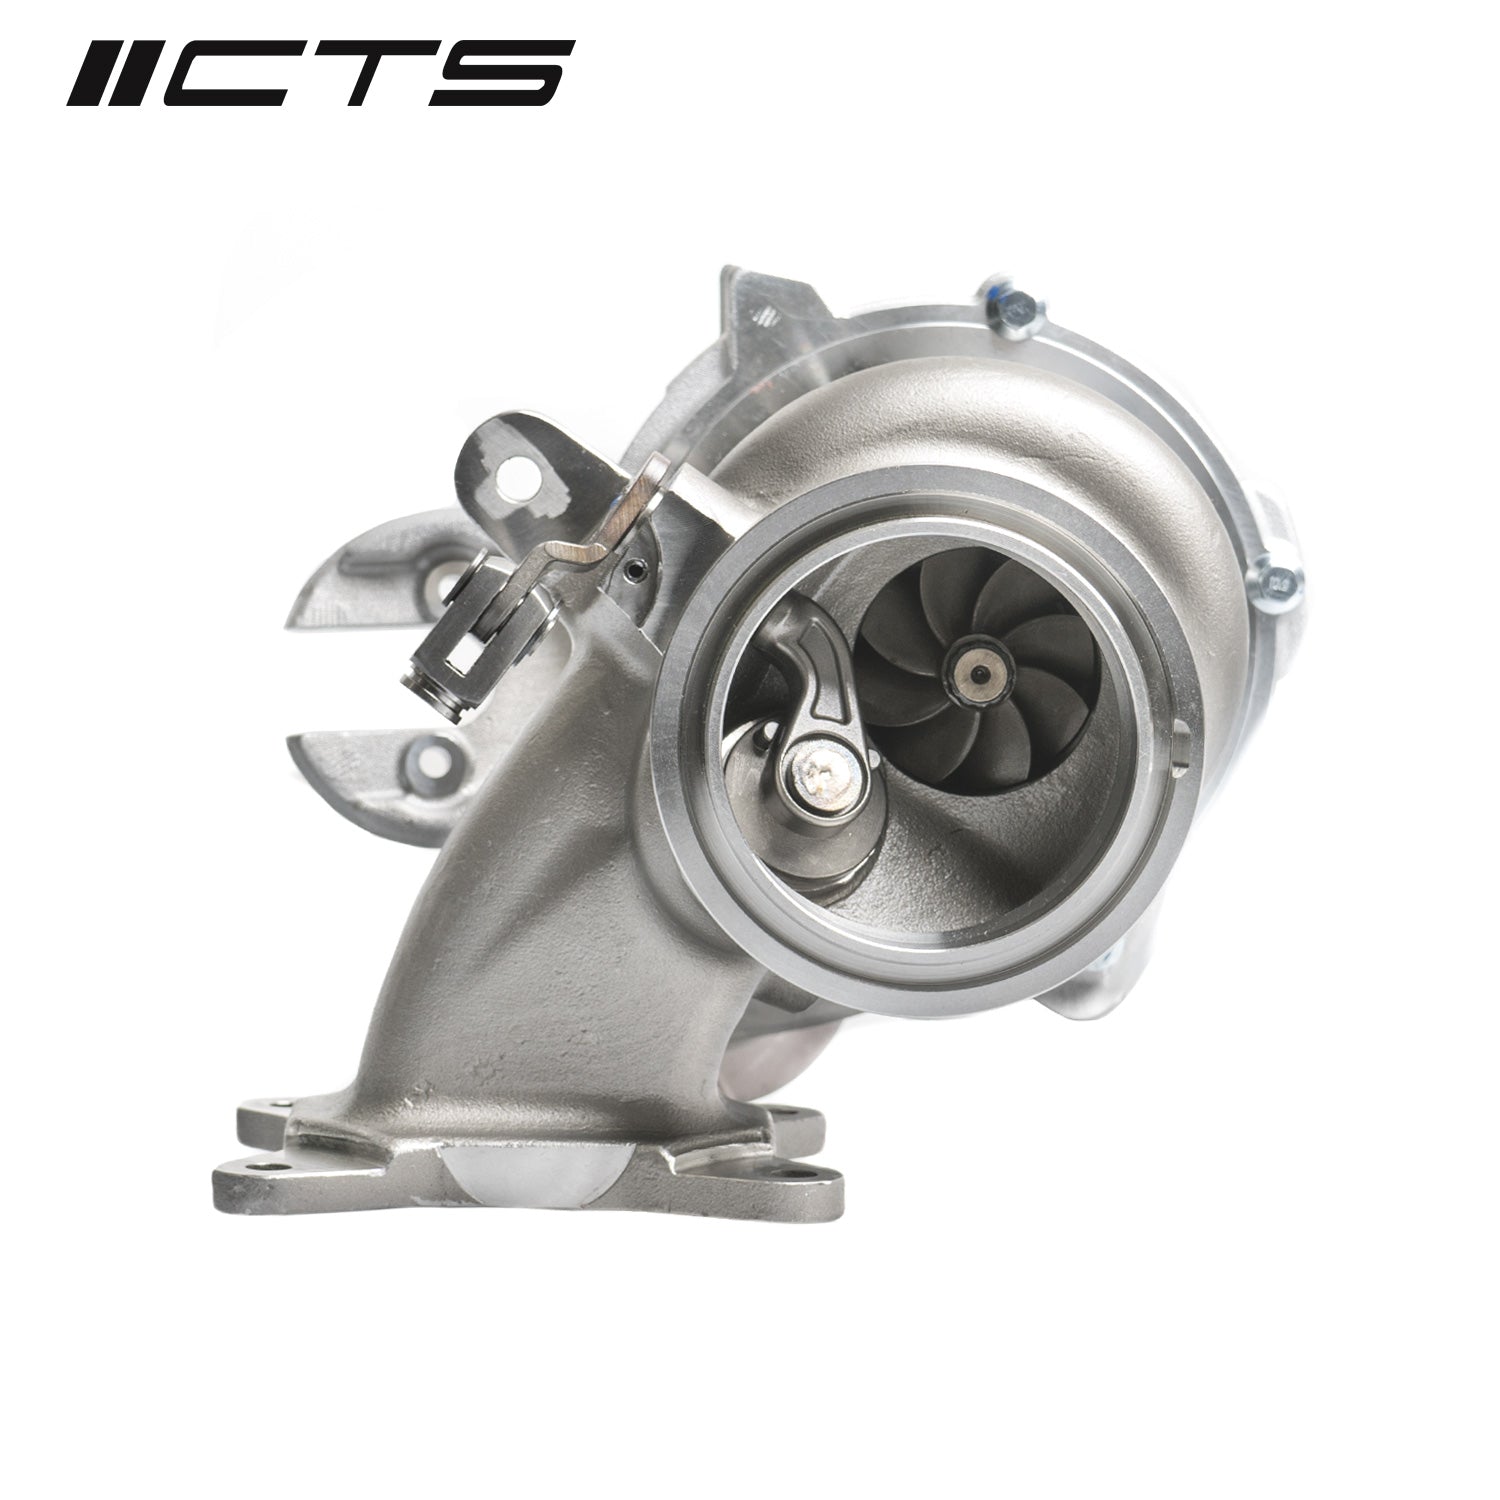 CTS TURBO IS38 REPLACEMENT TURBOCHARGER FOR MQB GOLF/GTI/GOLF R, AUDI A3/S3 (2015+)